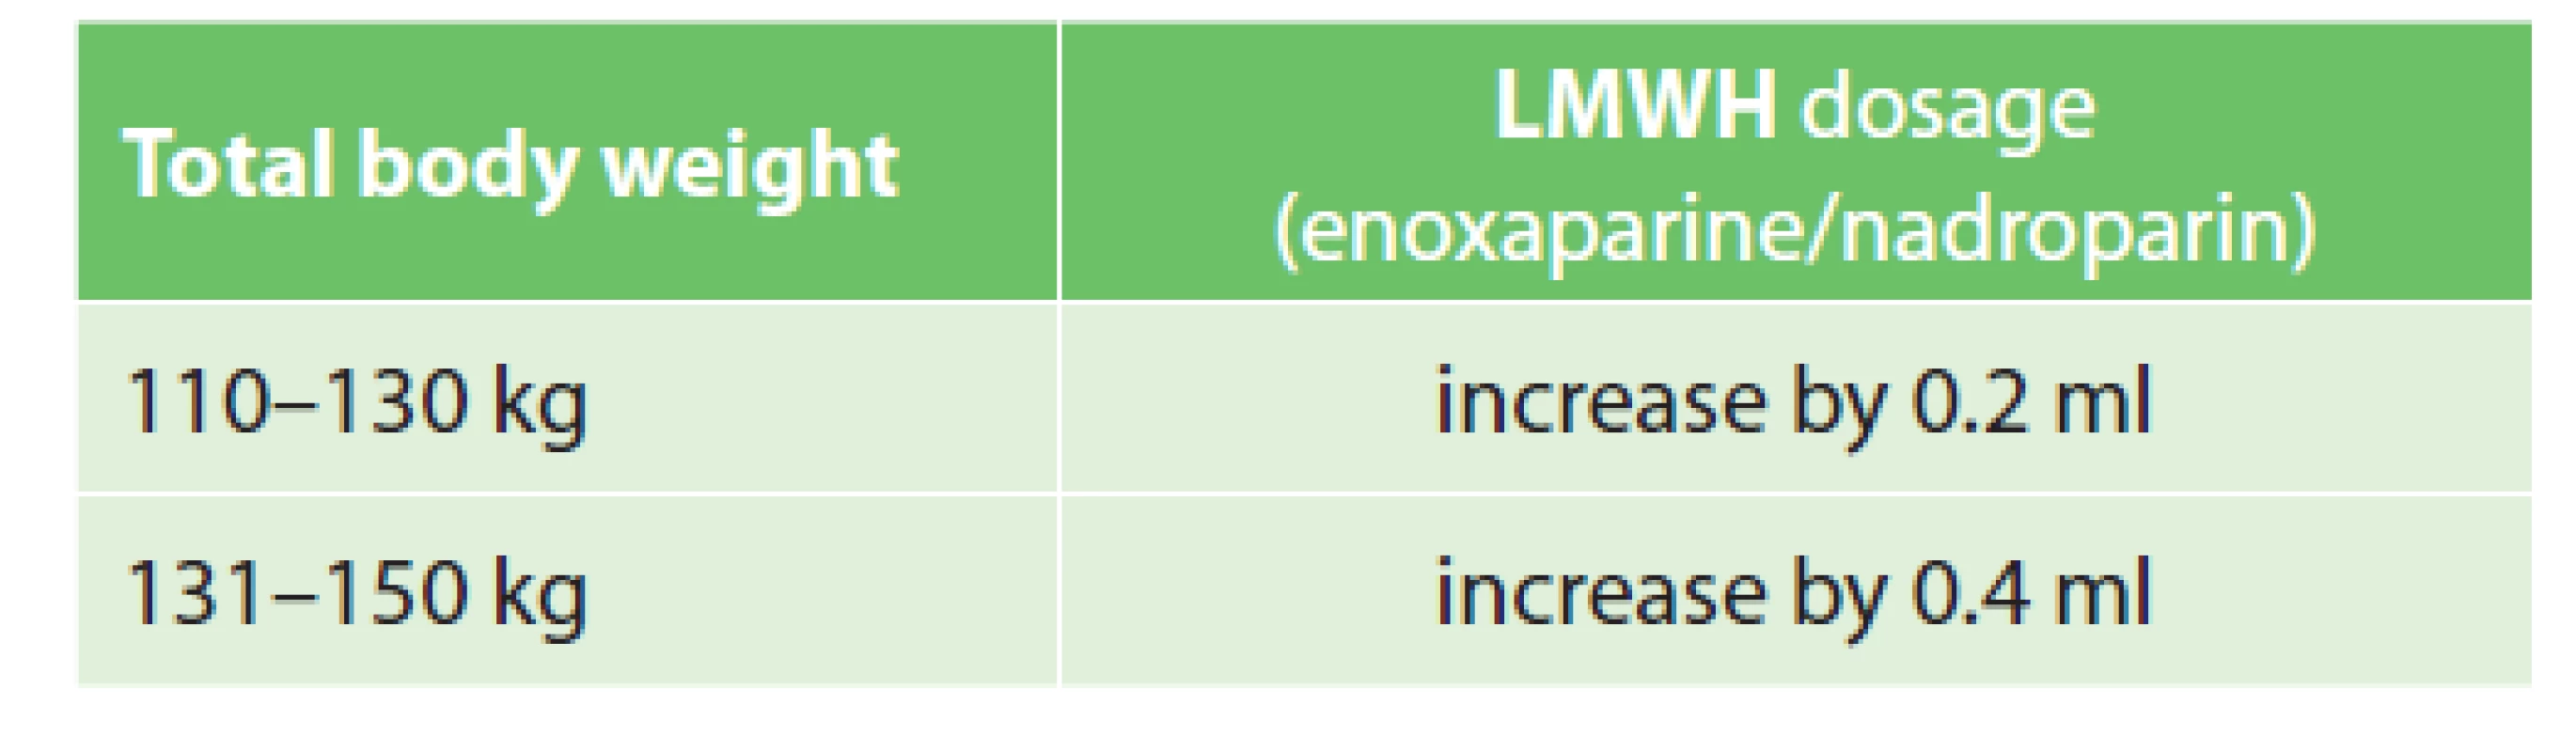 LMWH doses in obese patients